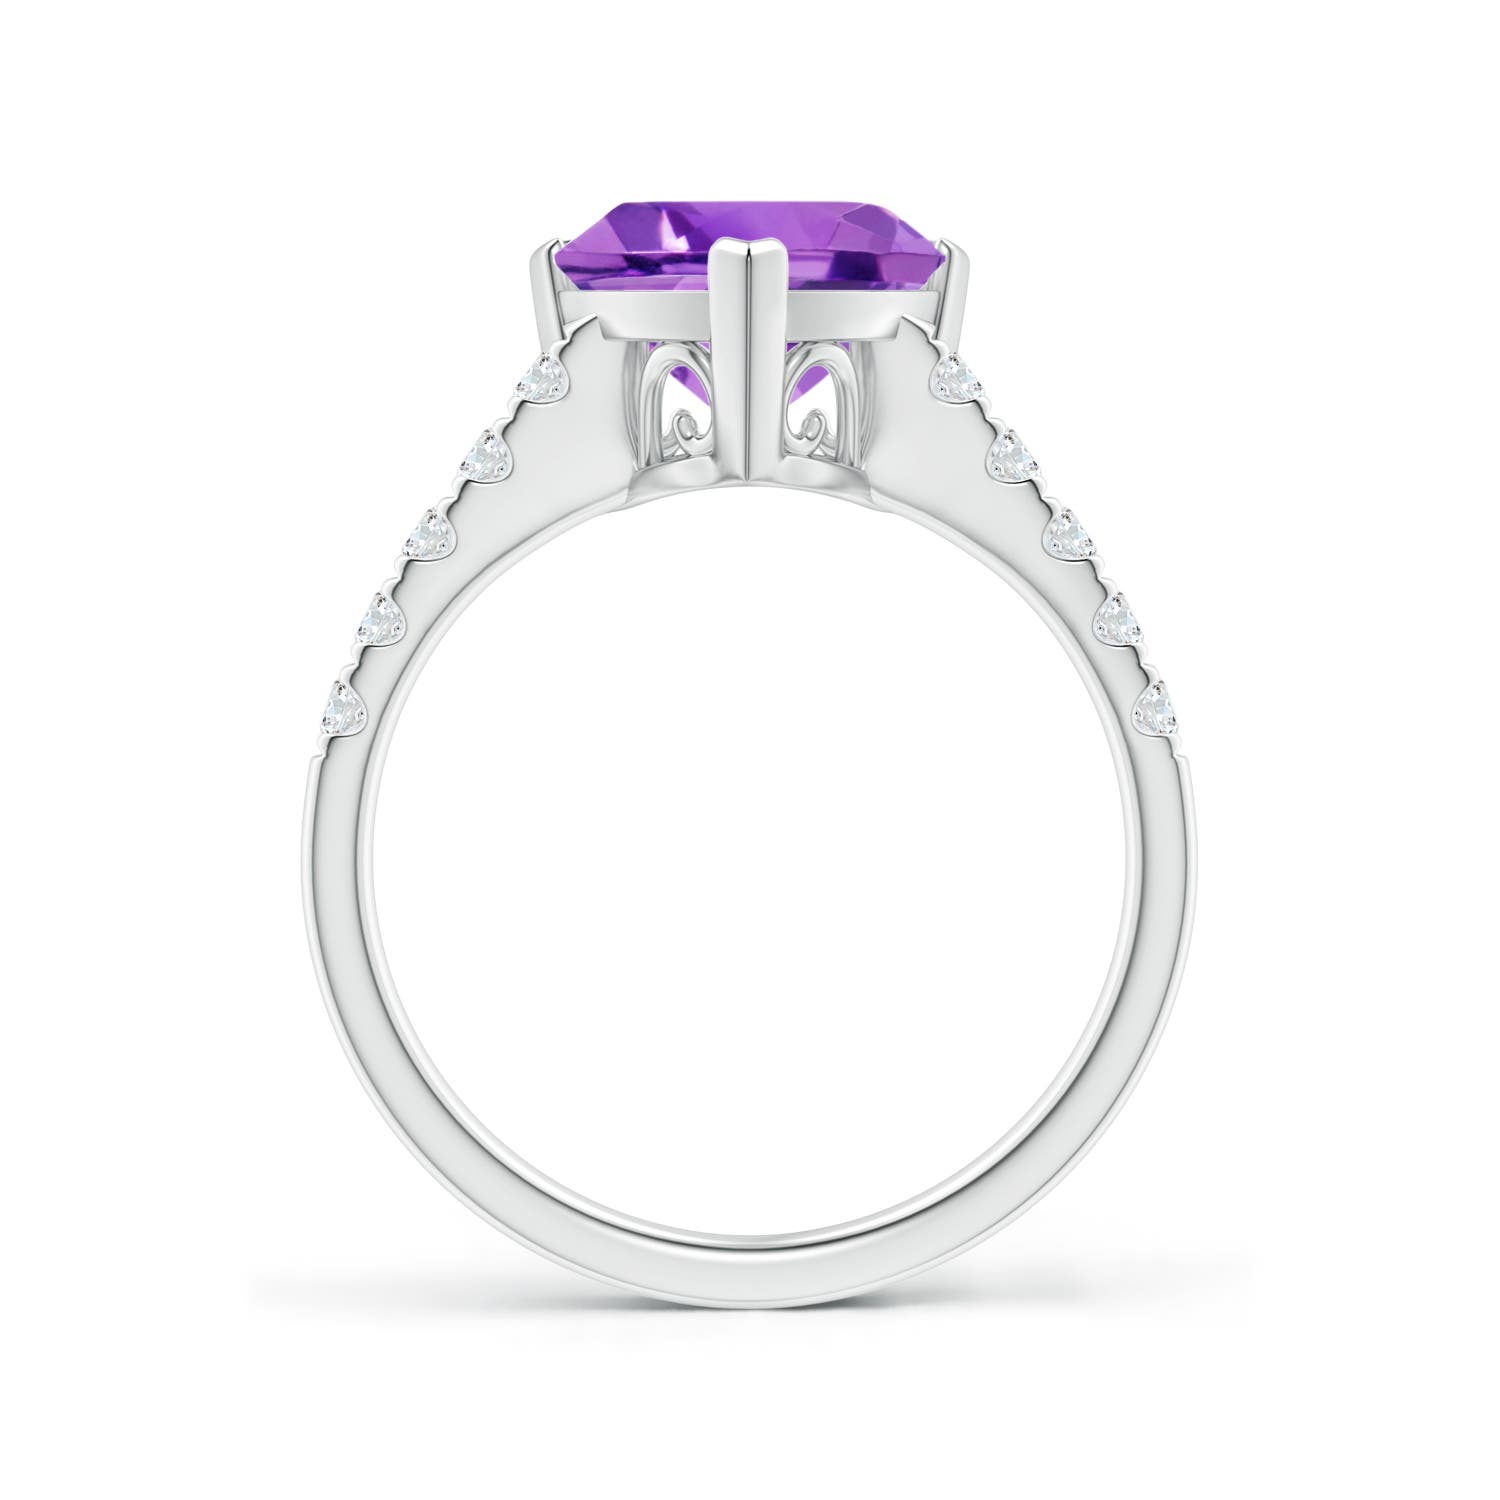 AA - Amethyst / 2.53 CT / 14 KT White Gold